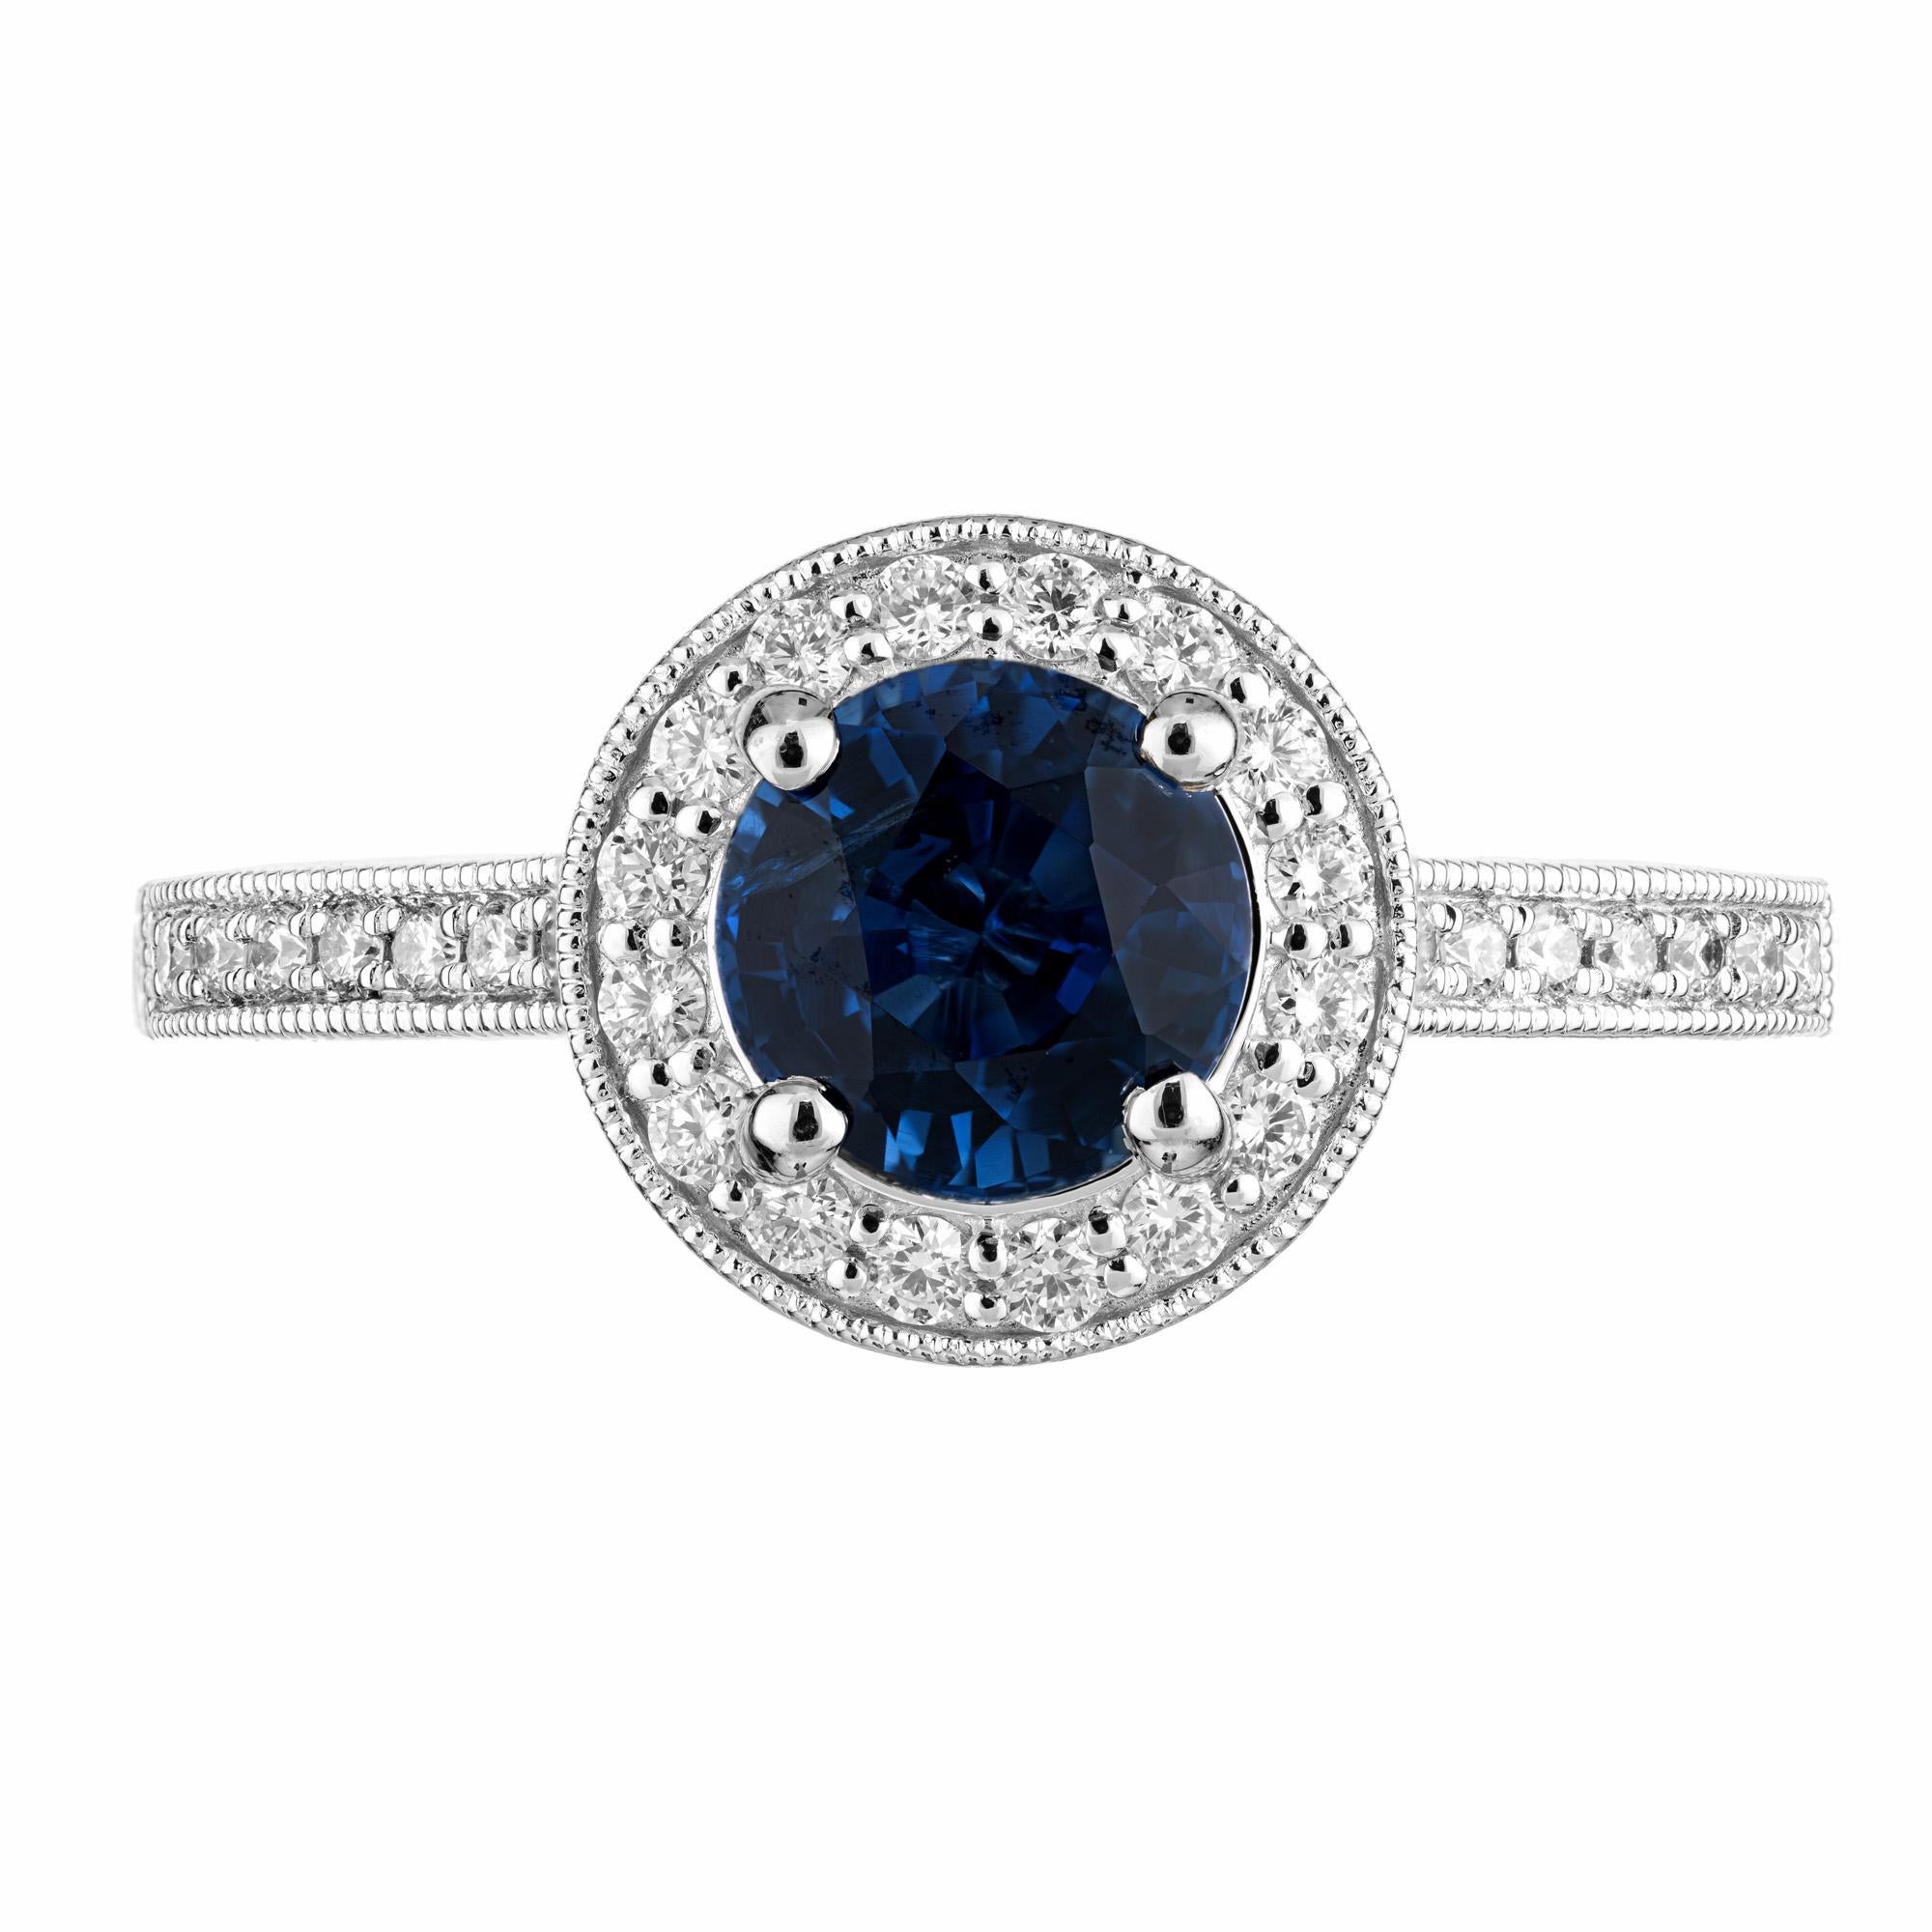 Sapphire Diamond Gold Halo Engagement Ring. The centerpiece is a 1.22 carat round sapphire certified by GIA as simple heat, accented by a halo of round brilliant cut diamonds. The shoulders of the 14k white gold setting is also adorned with round